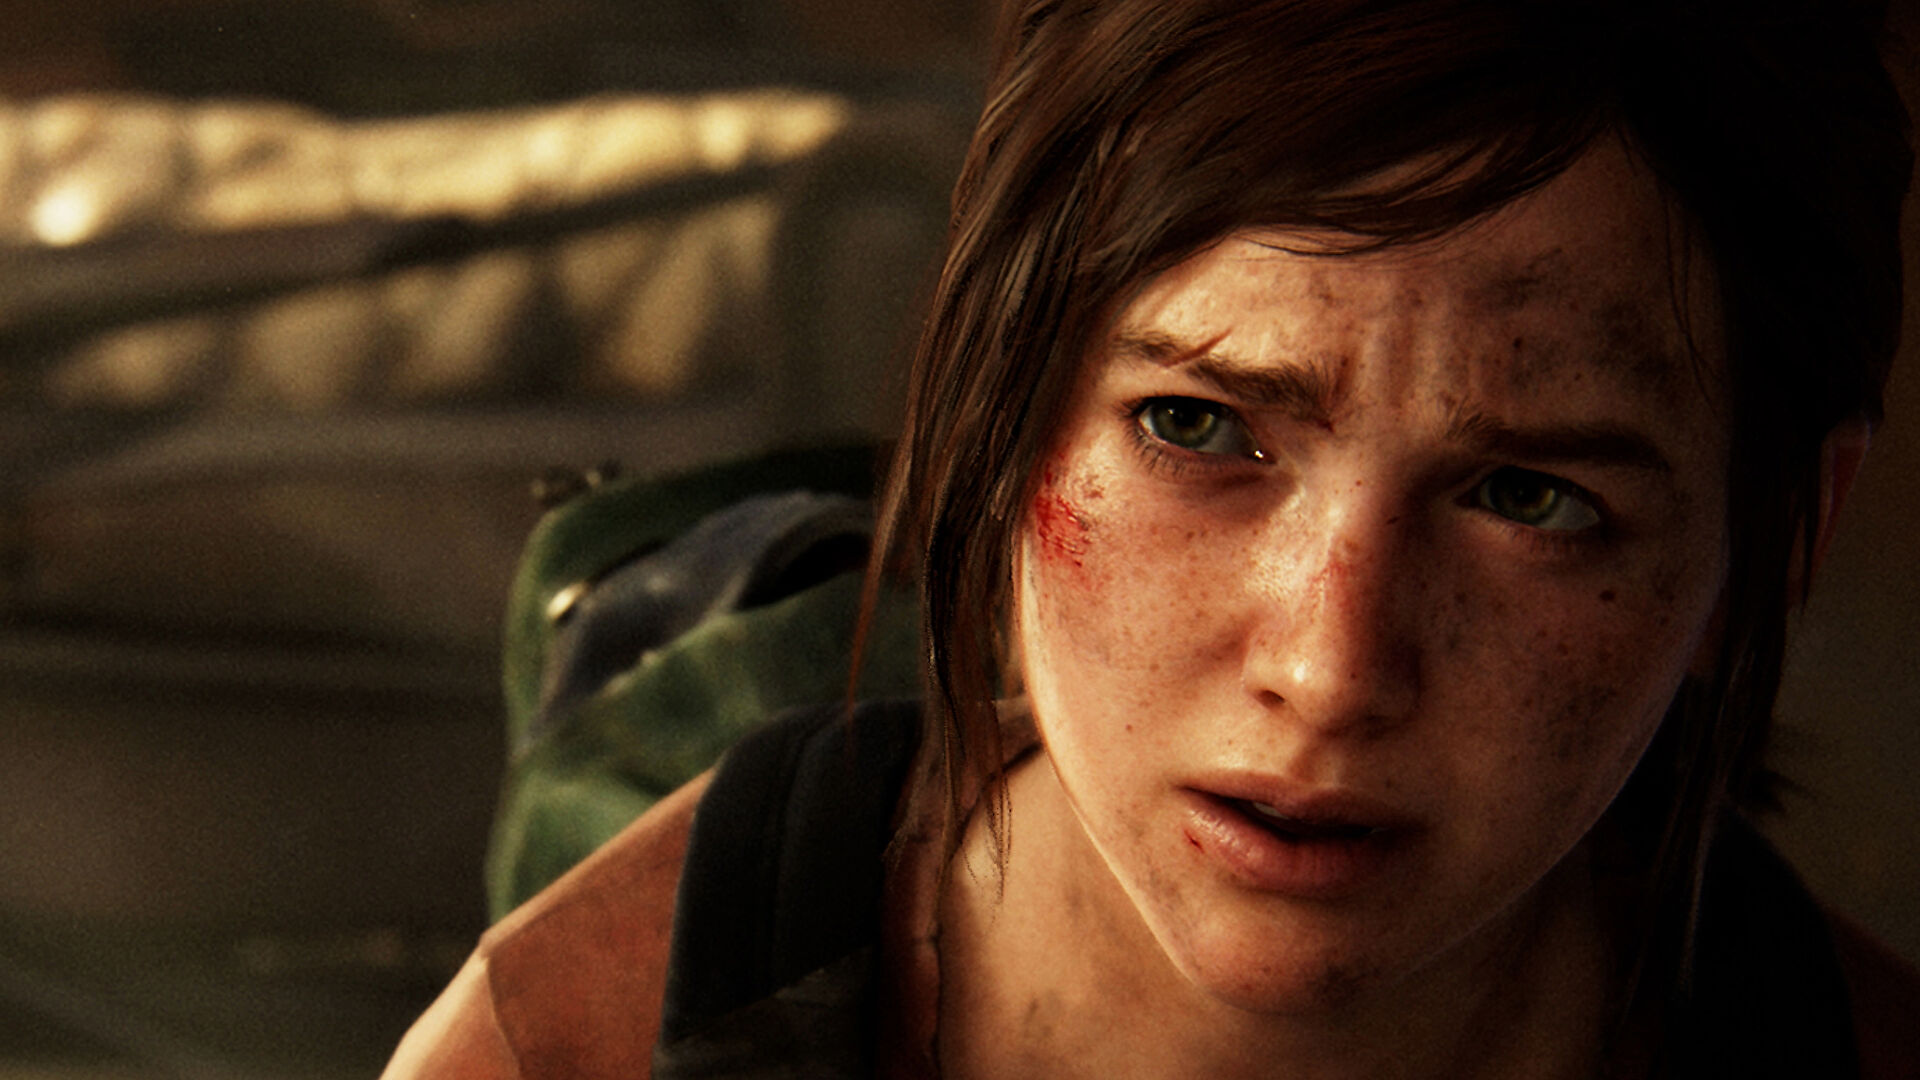  The Last of Us will run on Steam Deck, creator confirms 